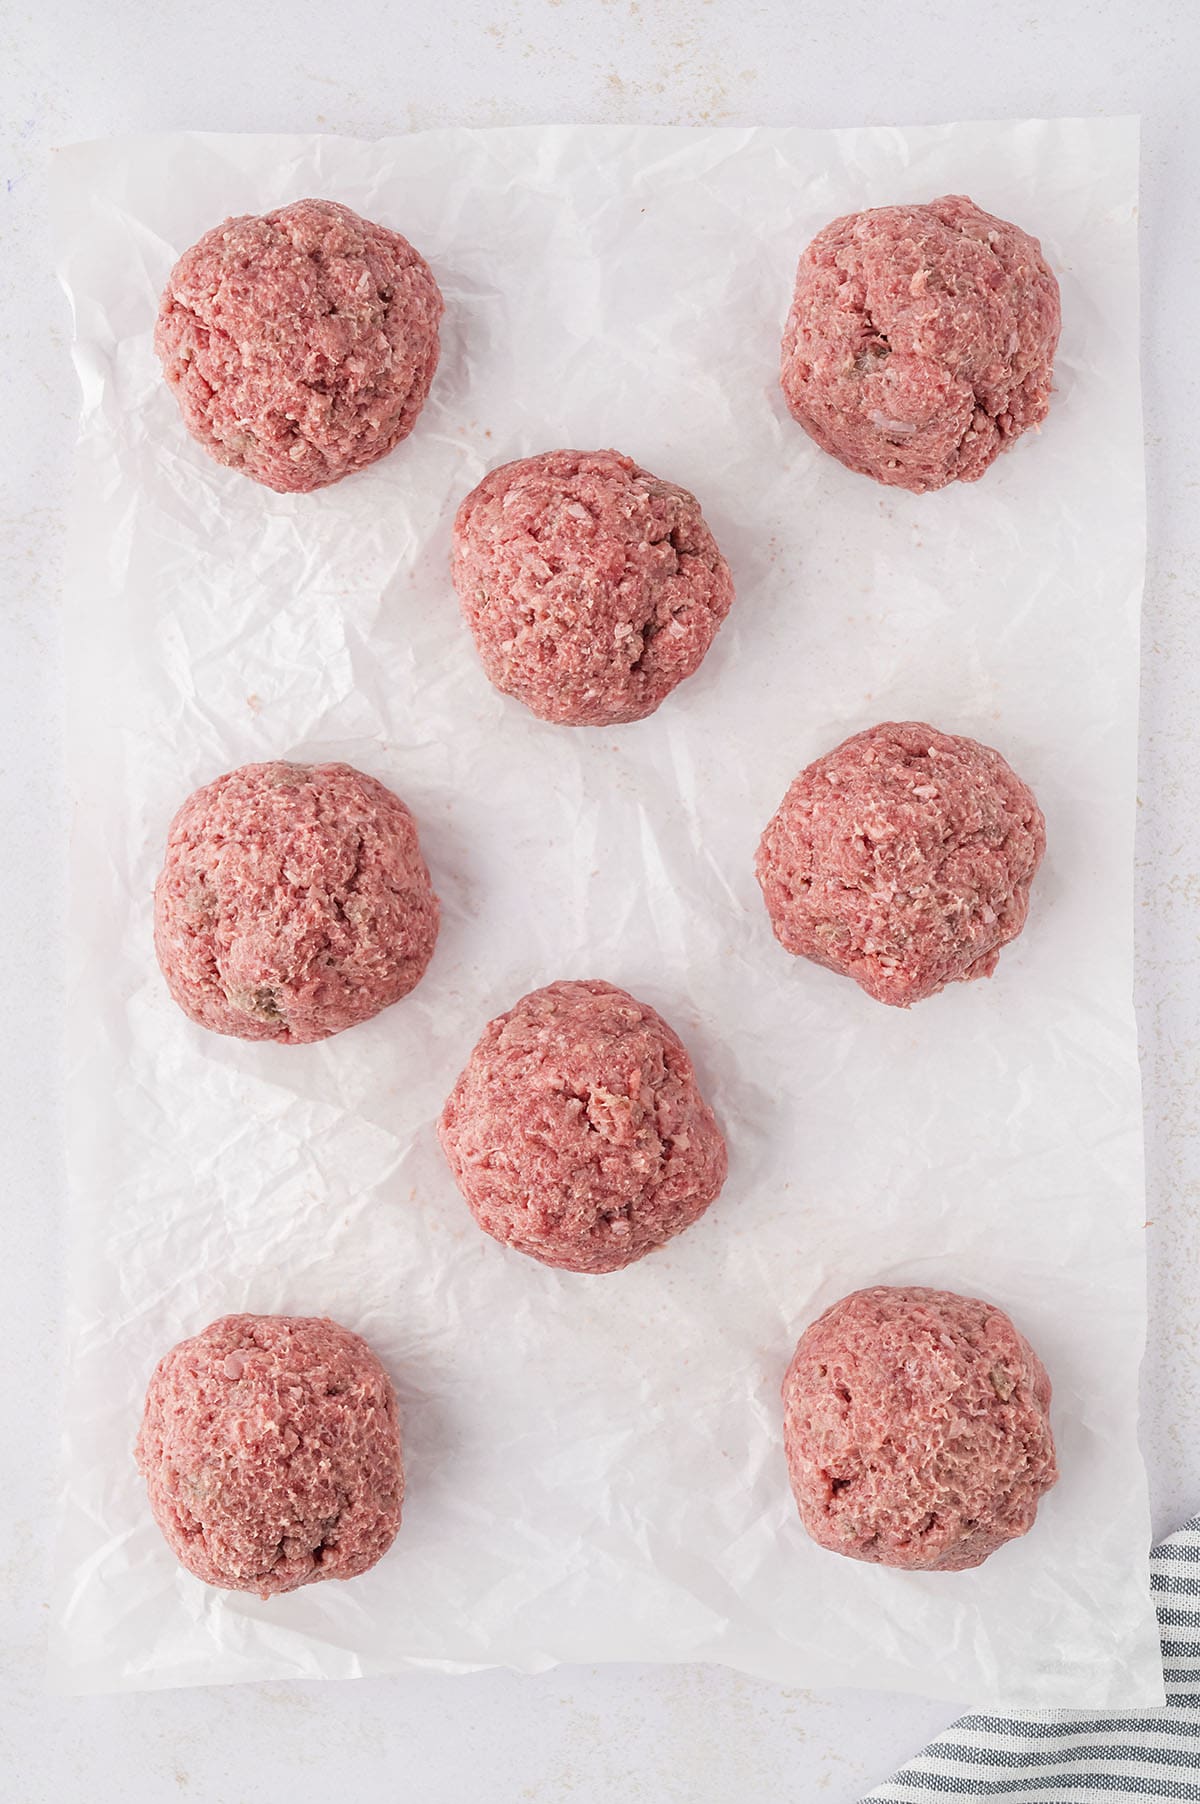 Balls of beef for smash burgers.